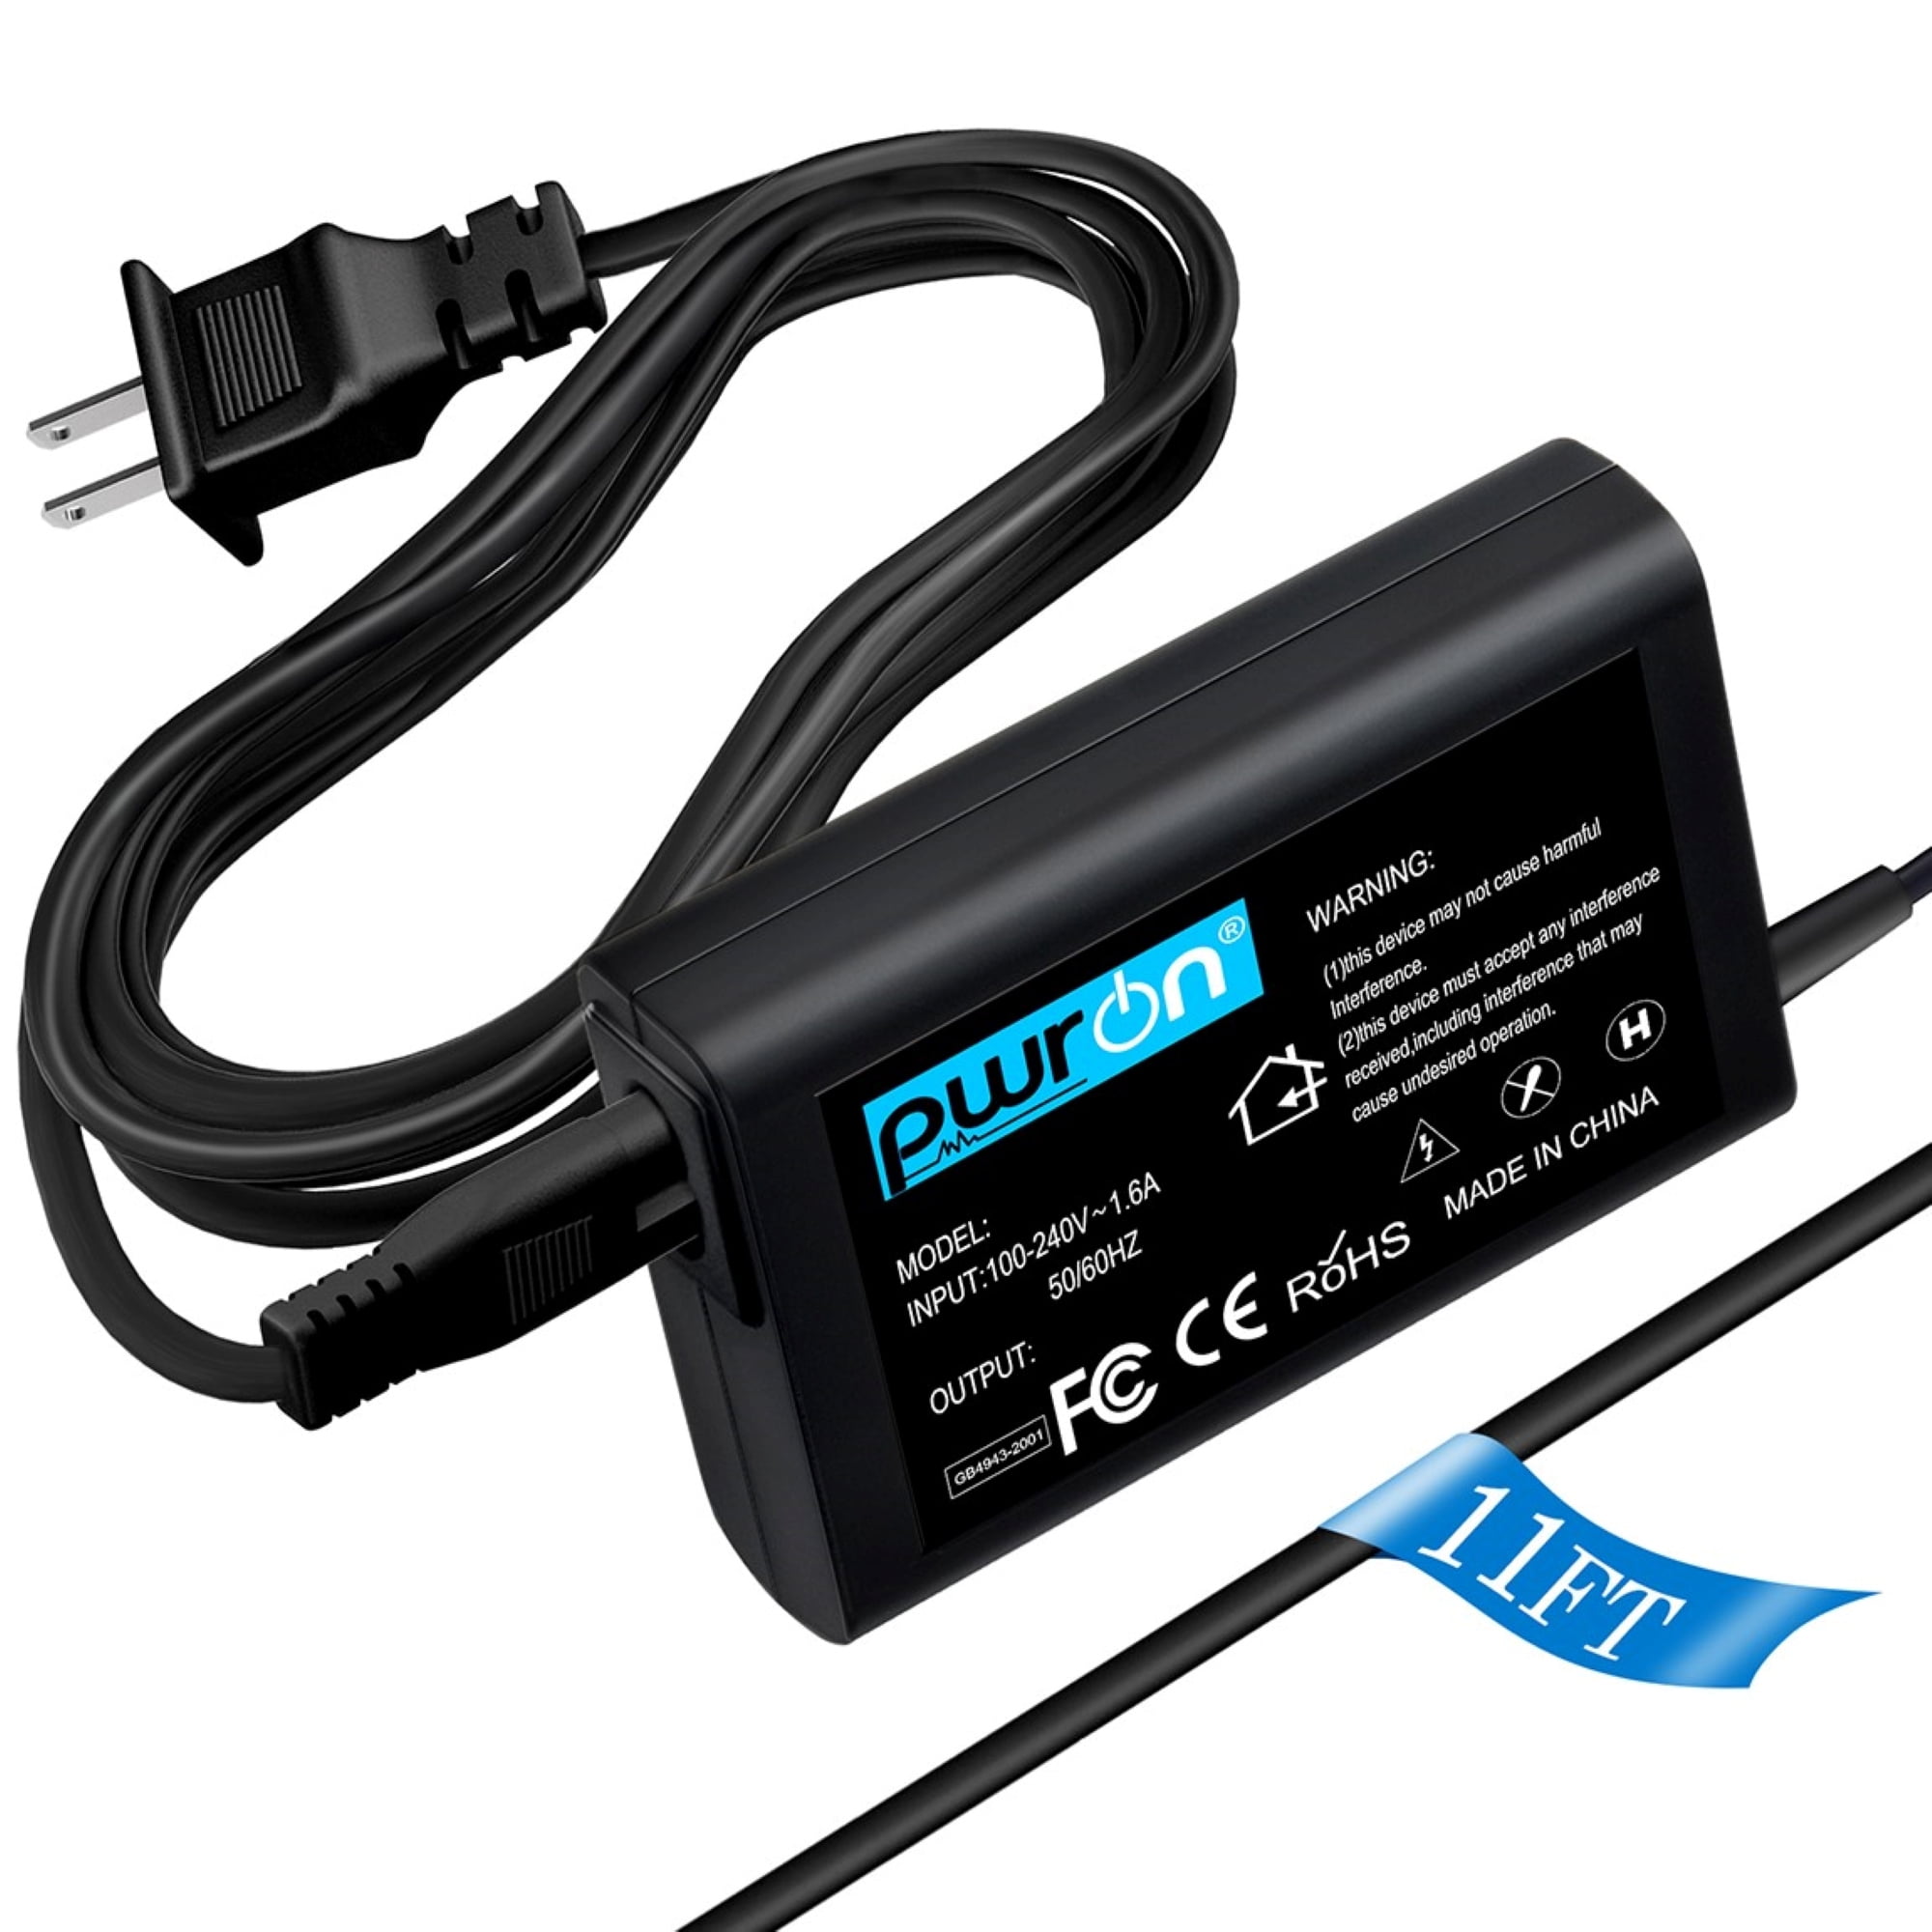 AC DC Adapter For SONY VAIO PCG-7112L VGN-N220E Laptop Charger Power Supply Cord 